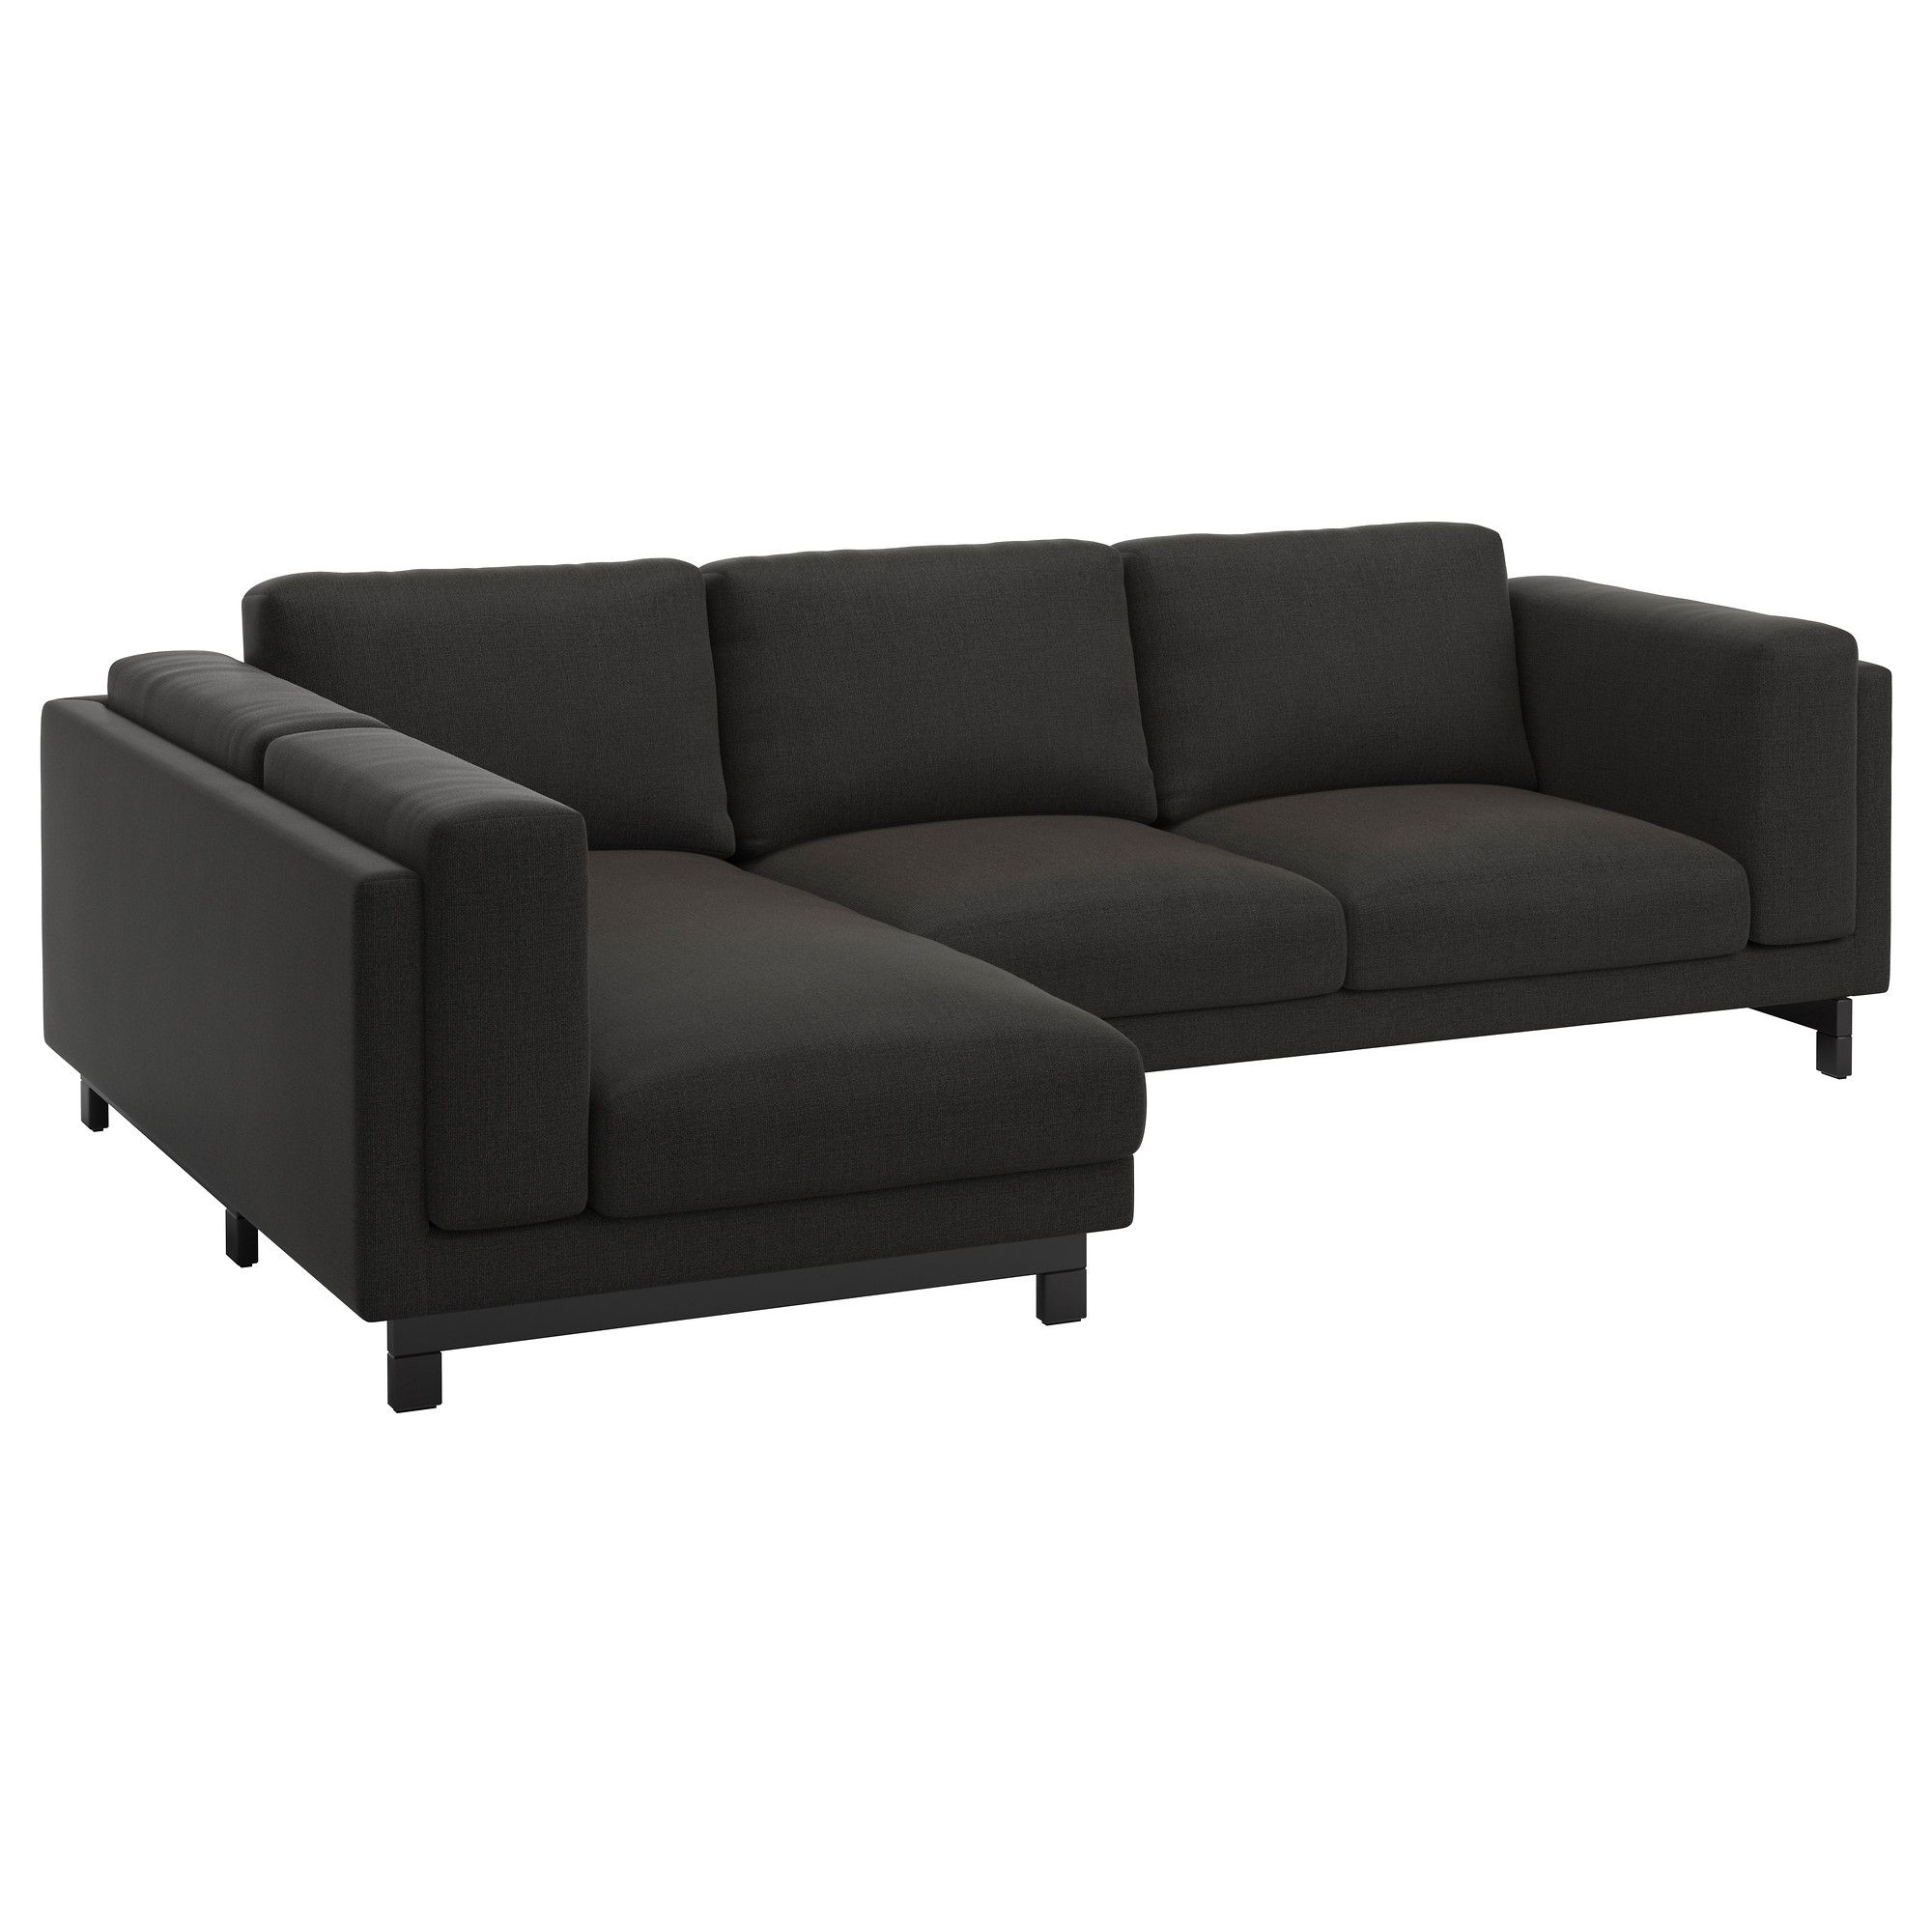 Most Popular Sectional Sofas At Ikea Inside Amazing Sectional Sofas Ikea 62 For Your Modern Sofa Inspiration (View 7 of 15)